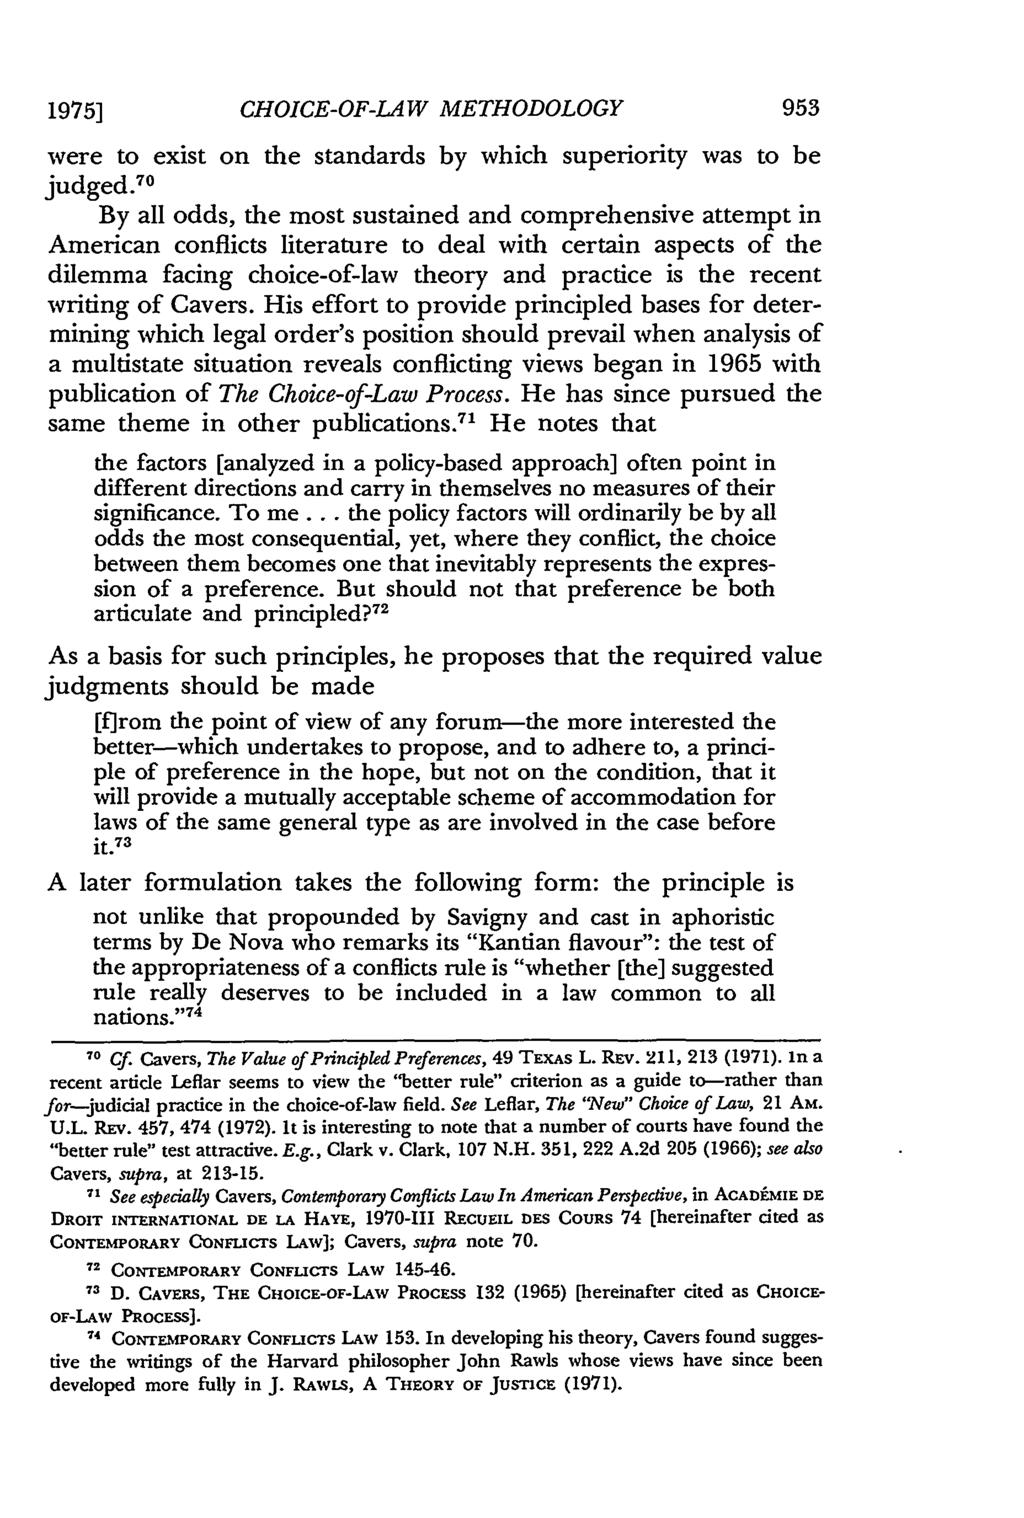 1975] CHOICE-OF-LAW METHODOLOGY were to exist on the standards by which superiority was to be judged.